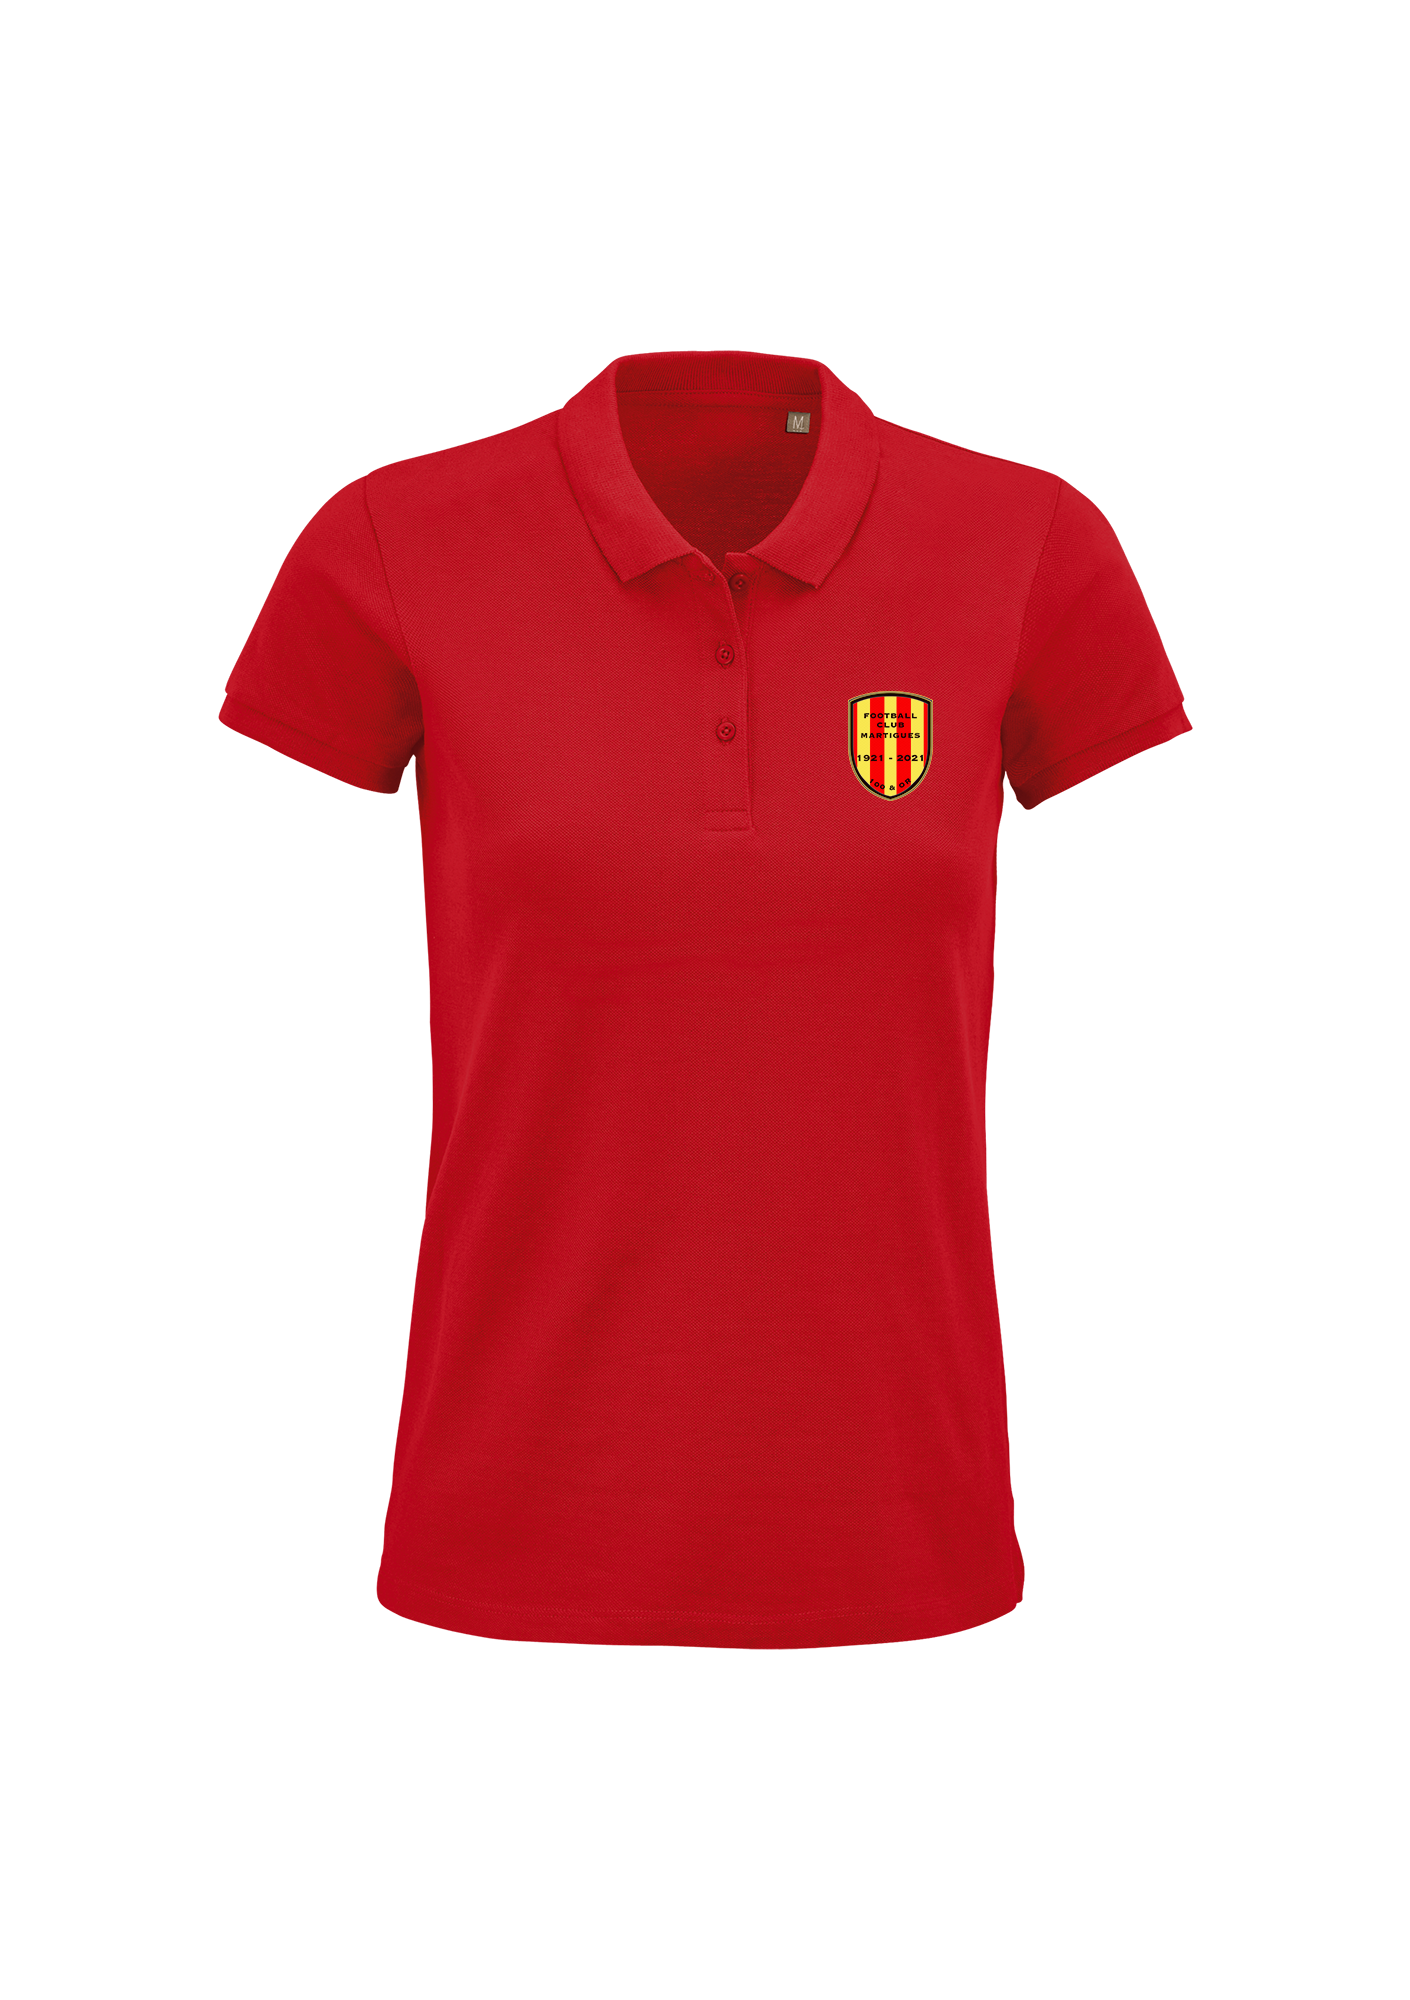 Polo Woman rouge "100 et Or" - n03575145A